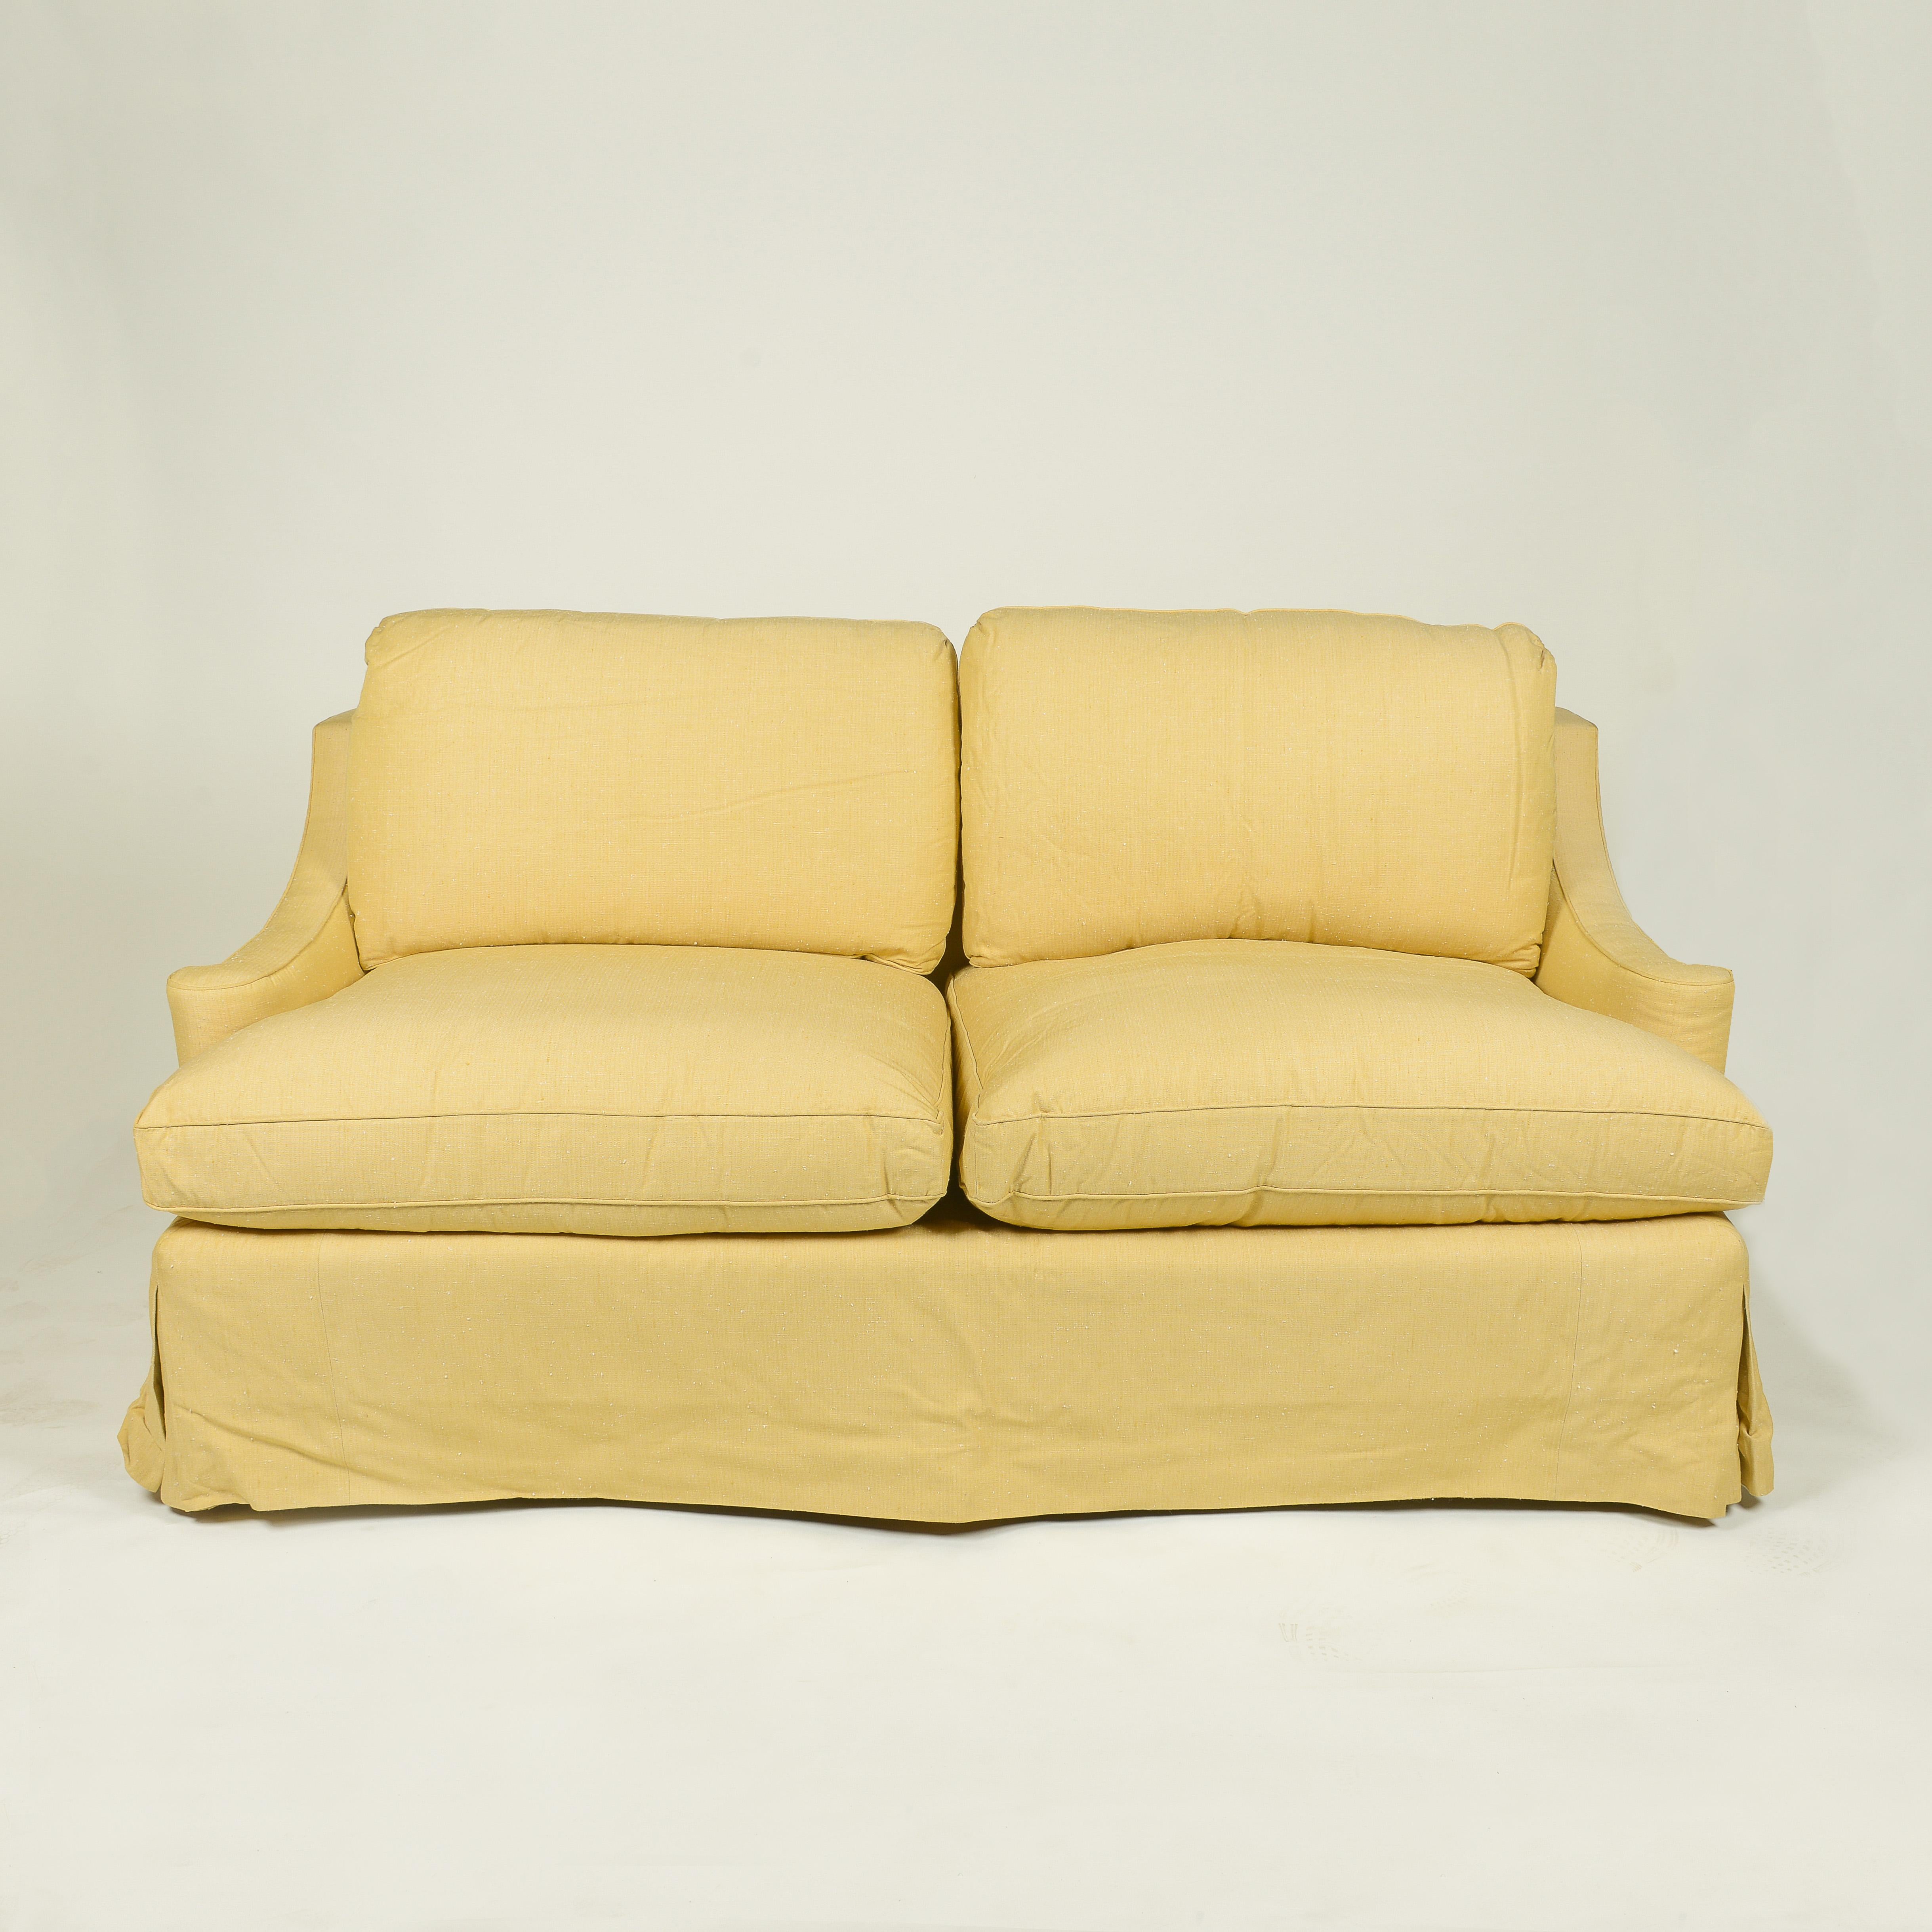 Upholstered in a wheat yellow slubby silk in a modified Regency form; the highest quality construction with down and foam; custom made for Albert Hadley.